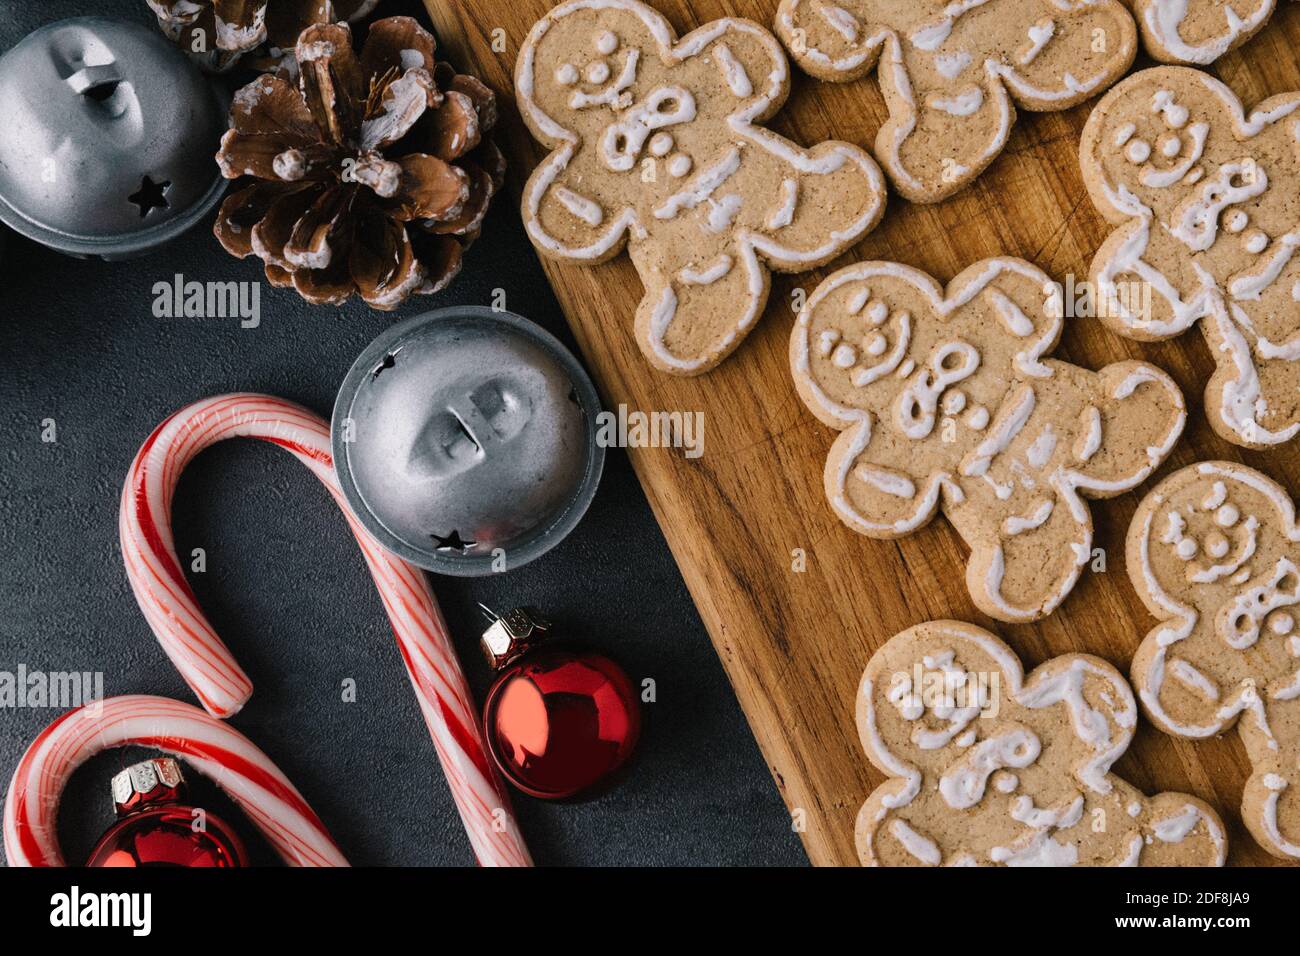 Christmas Gingerbread Man Cookies on Wooden Board With Candy Canes On Dark Slate Texture Stock Photo